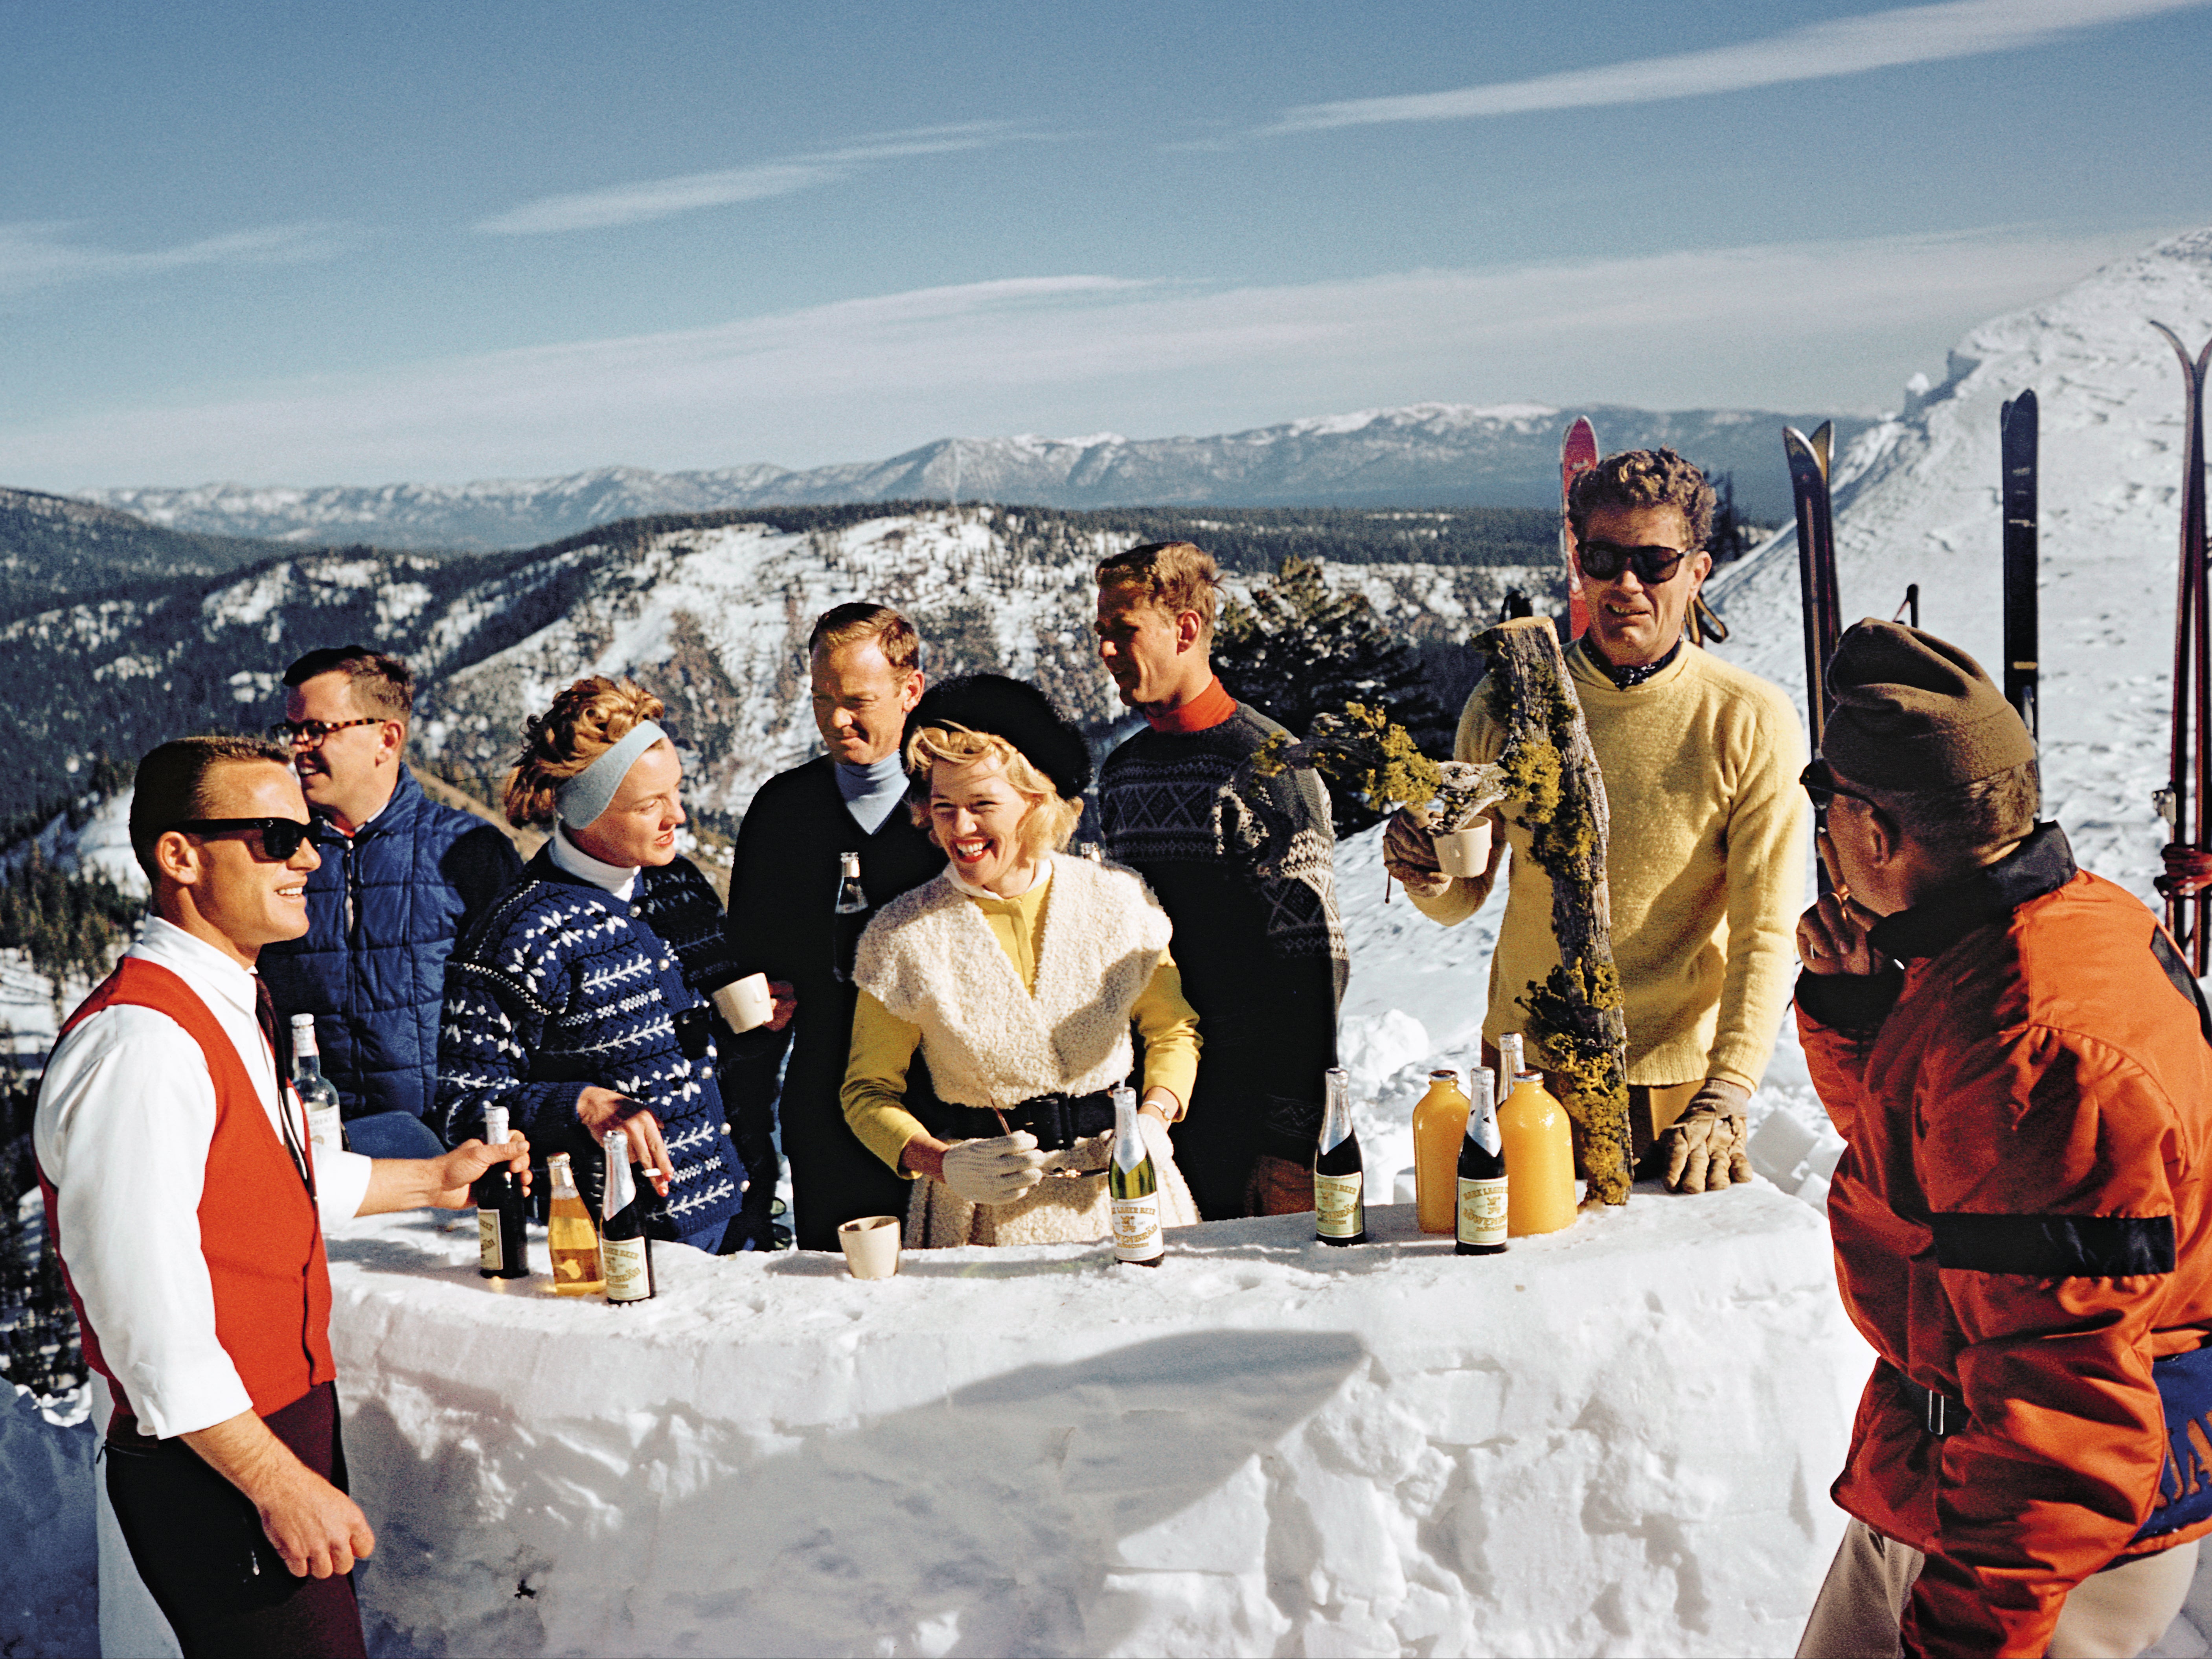 American lawyer and businessman Alexander Cochrane Cushing (in yellow) with others at the Squaw Valley resort, which he developed, in California, in 1961